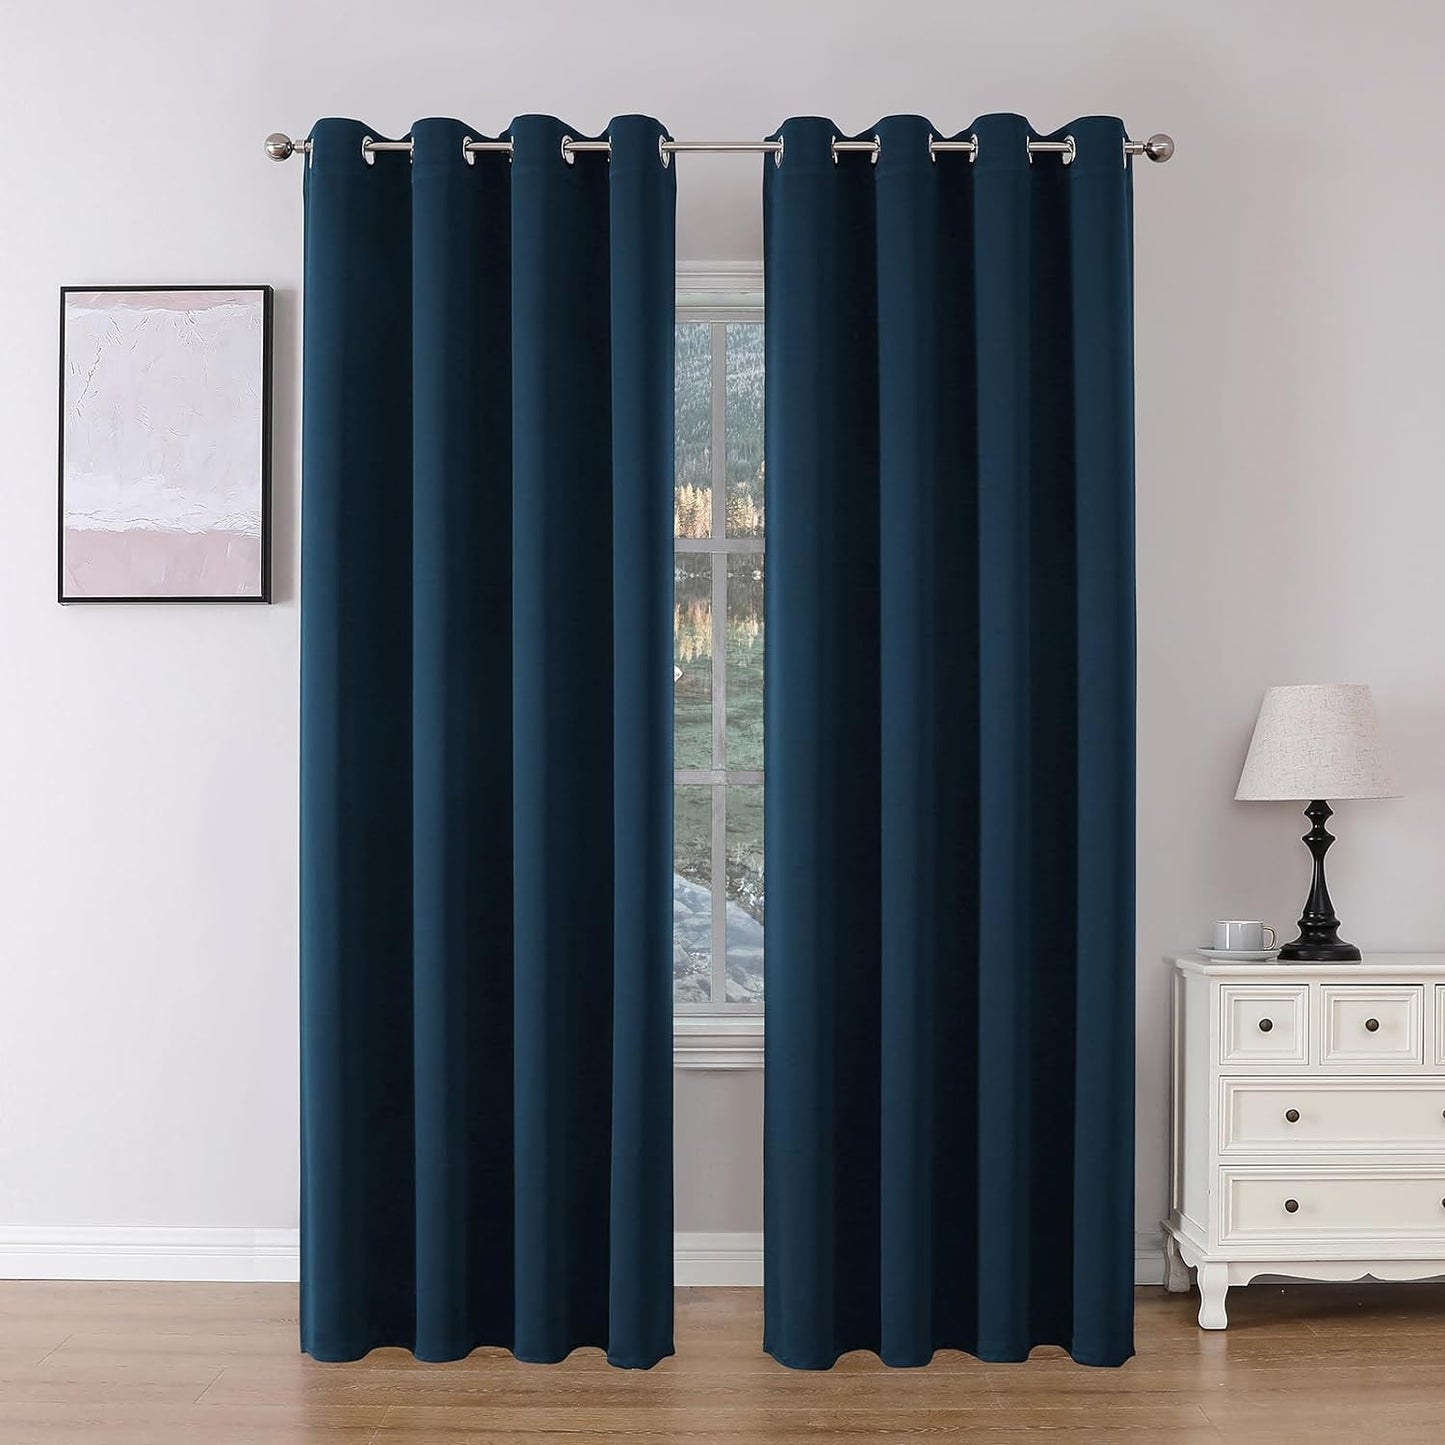 Joydeco Blackout Curtains 84 Inch Length 2 Panels Set, Thermal Insulated Long Curtains& Drapes 2 Burg, Room Darkening Grommet Curtains for Bedroom Living Room Window (Black, W52 X L84 Inch)  Joydeco Navy Blue 52W X 95L Inch X 2 Panels 